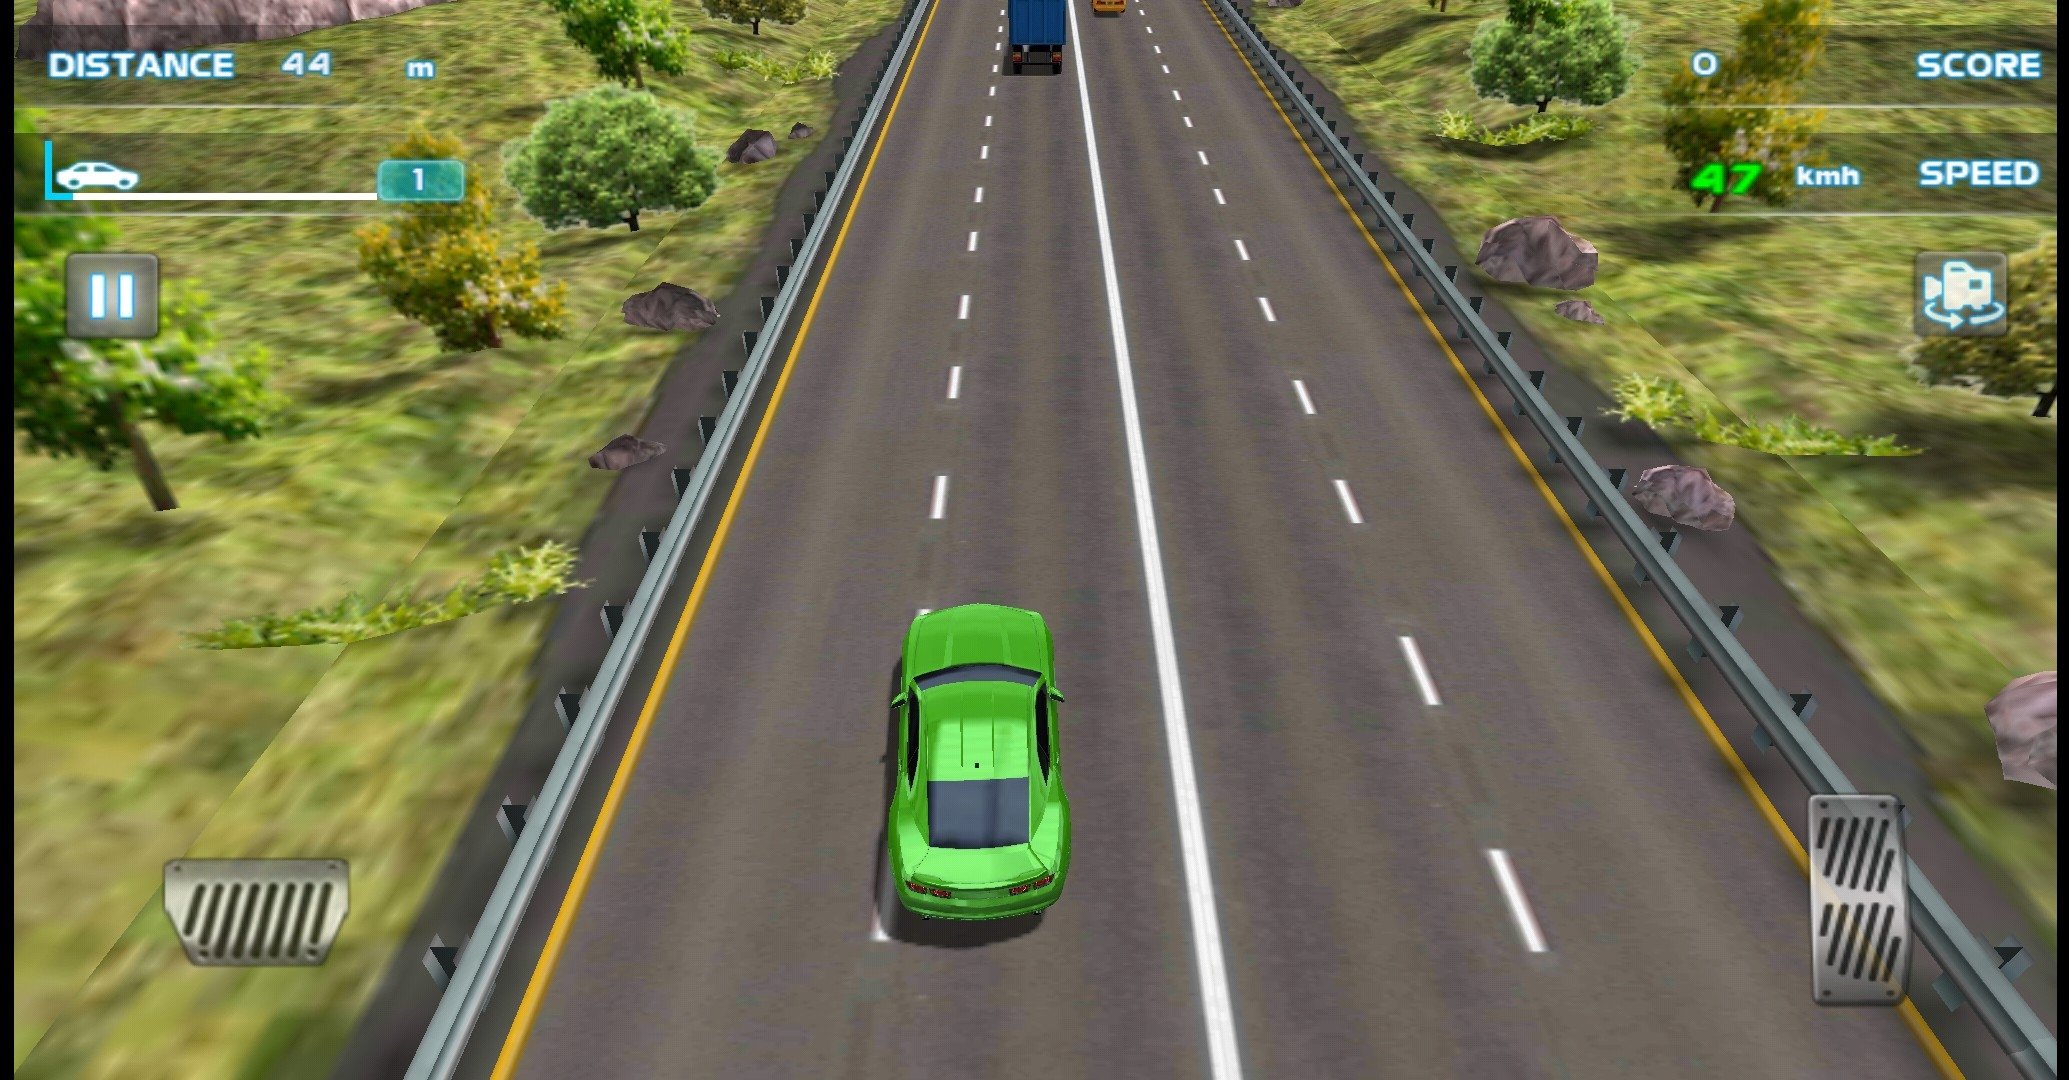 Turbo Driving Racing 3D APK for Android Download